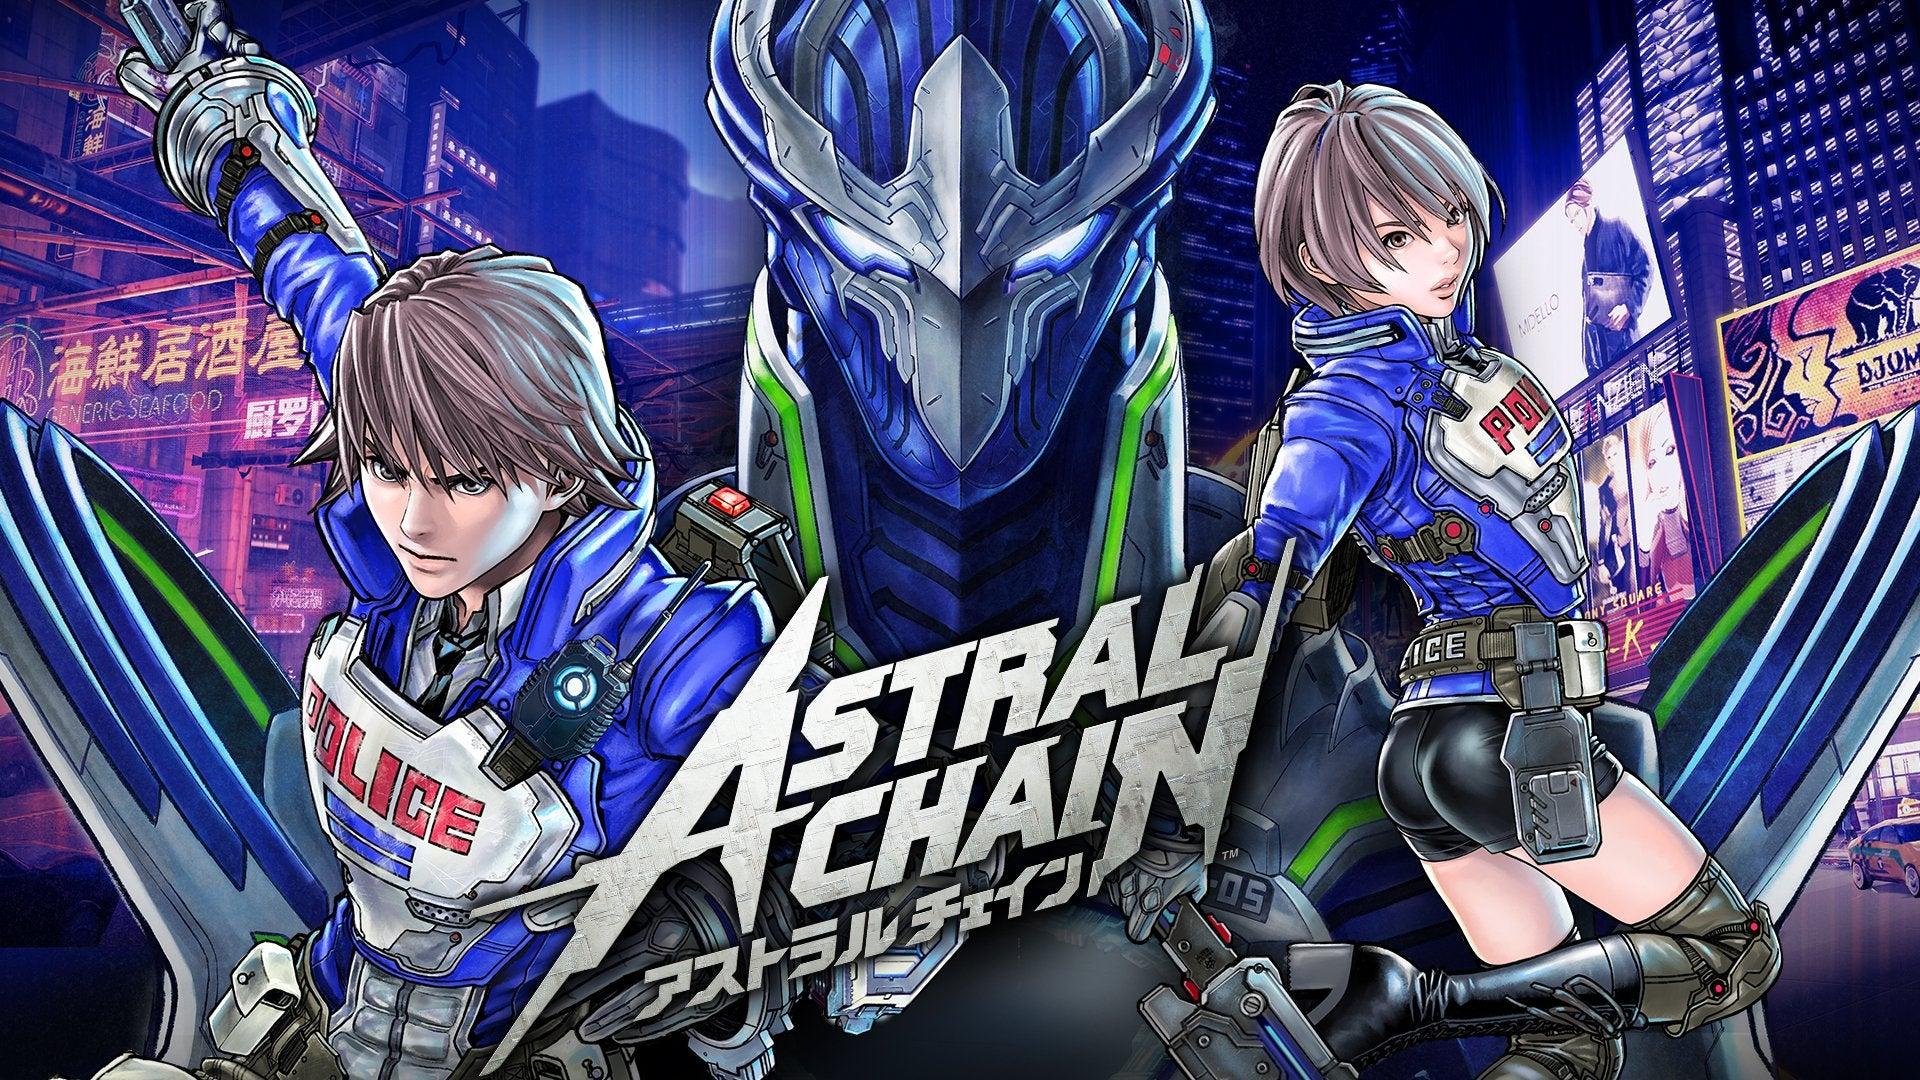 High quality new Astral Chain artwork